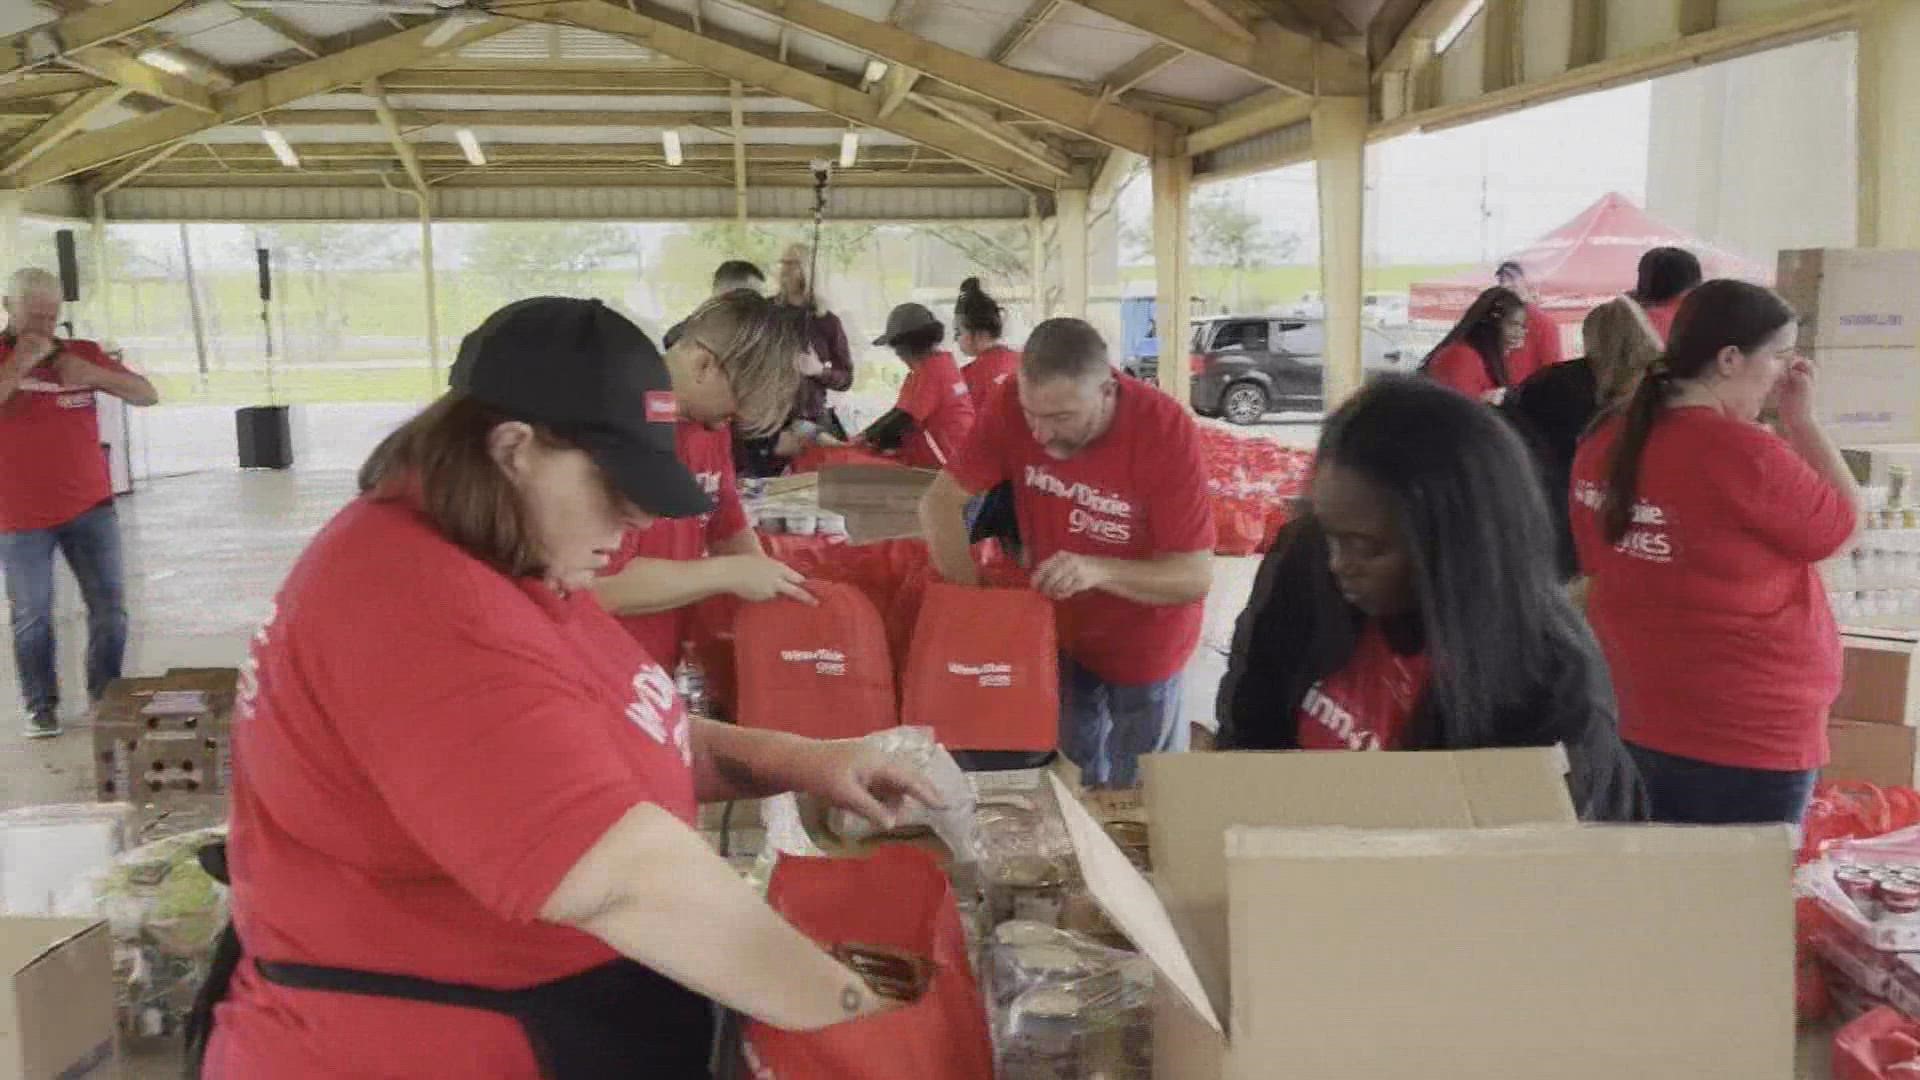 Groceries will be provided by Winn Dixie and hot meals from Second Harvest to more than 300 families.